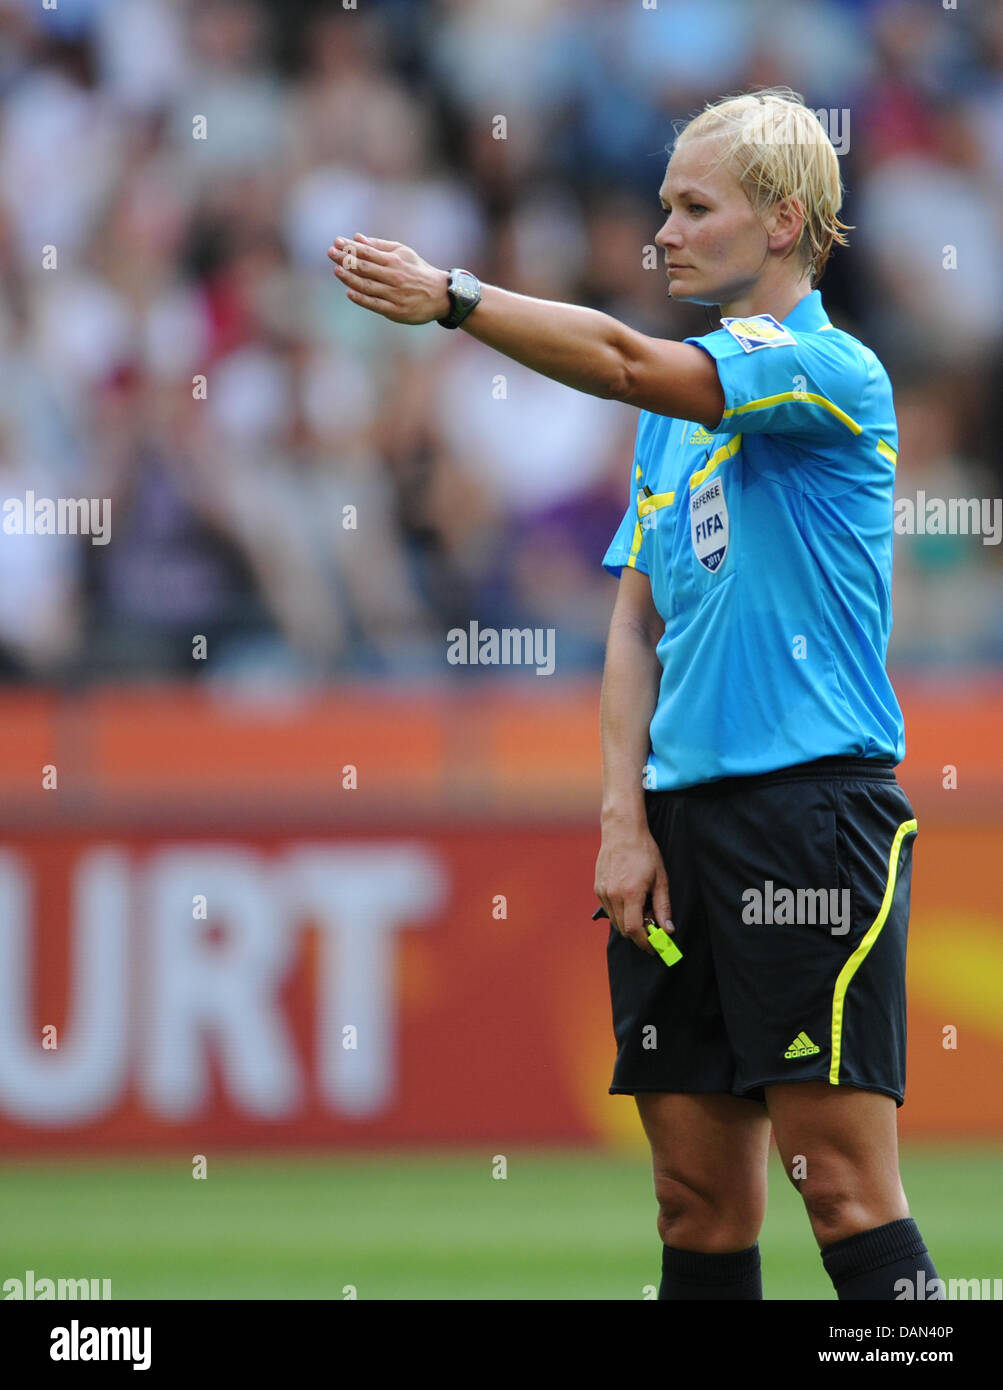 German referee Bibiana Steinhaus is pictured prior to the Group D match Equatorial Guinea against Brazil of FIFA Women's World Cup soccer tournament at the FIFA Women's World Cup Stadium in Frankfurt, Germany, 06 July 2011. Foto: Arne Dedert dpa/lhe Stock Photo